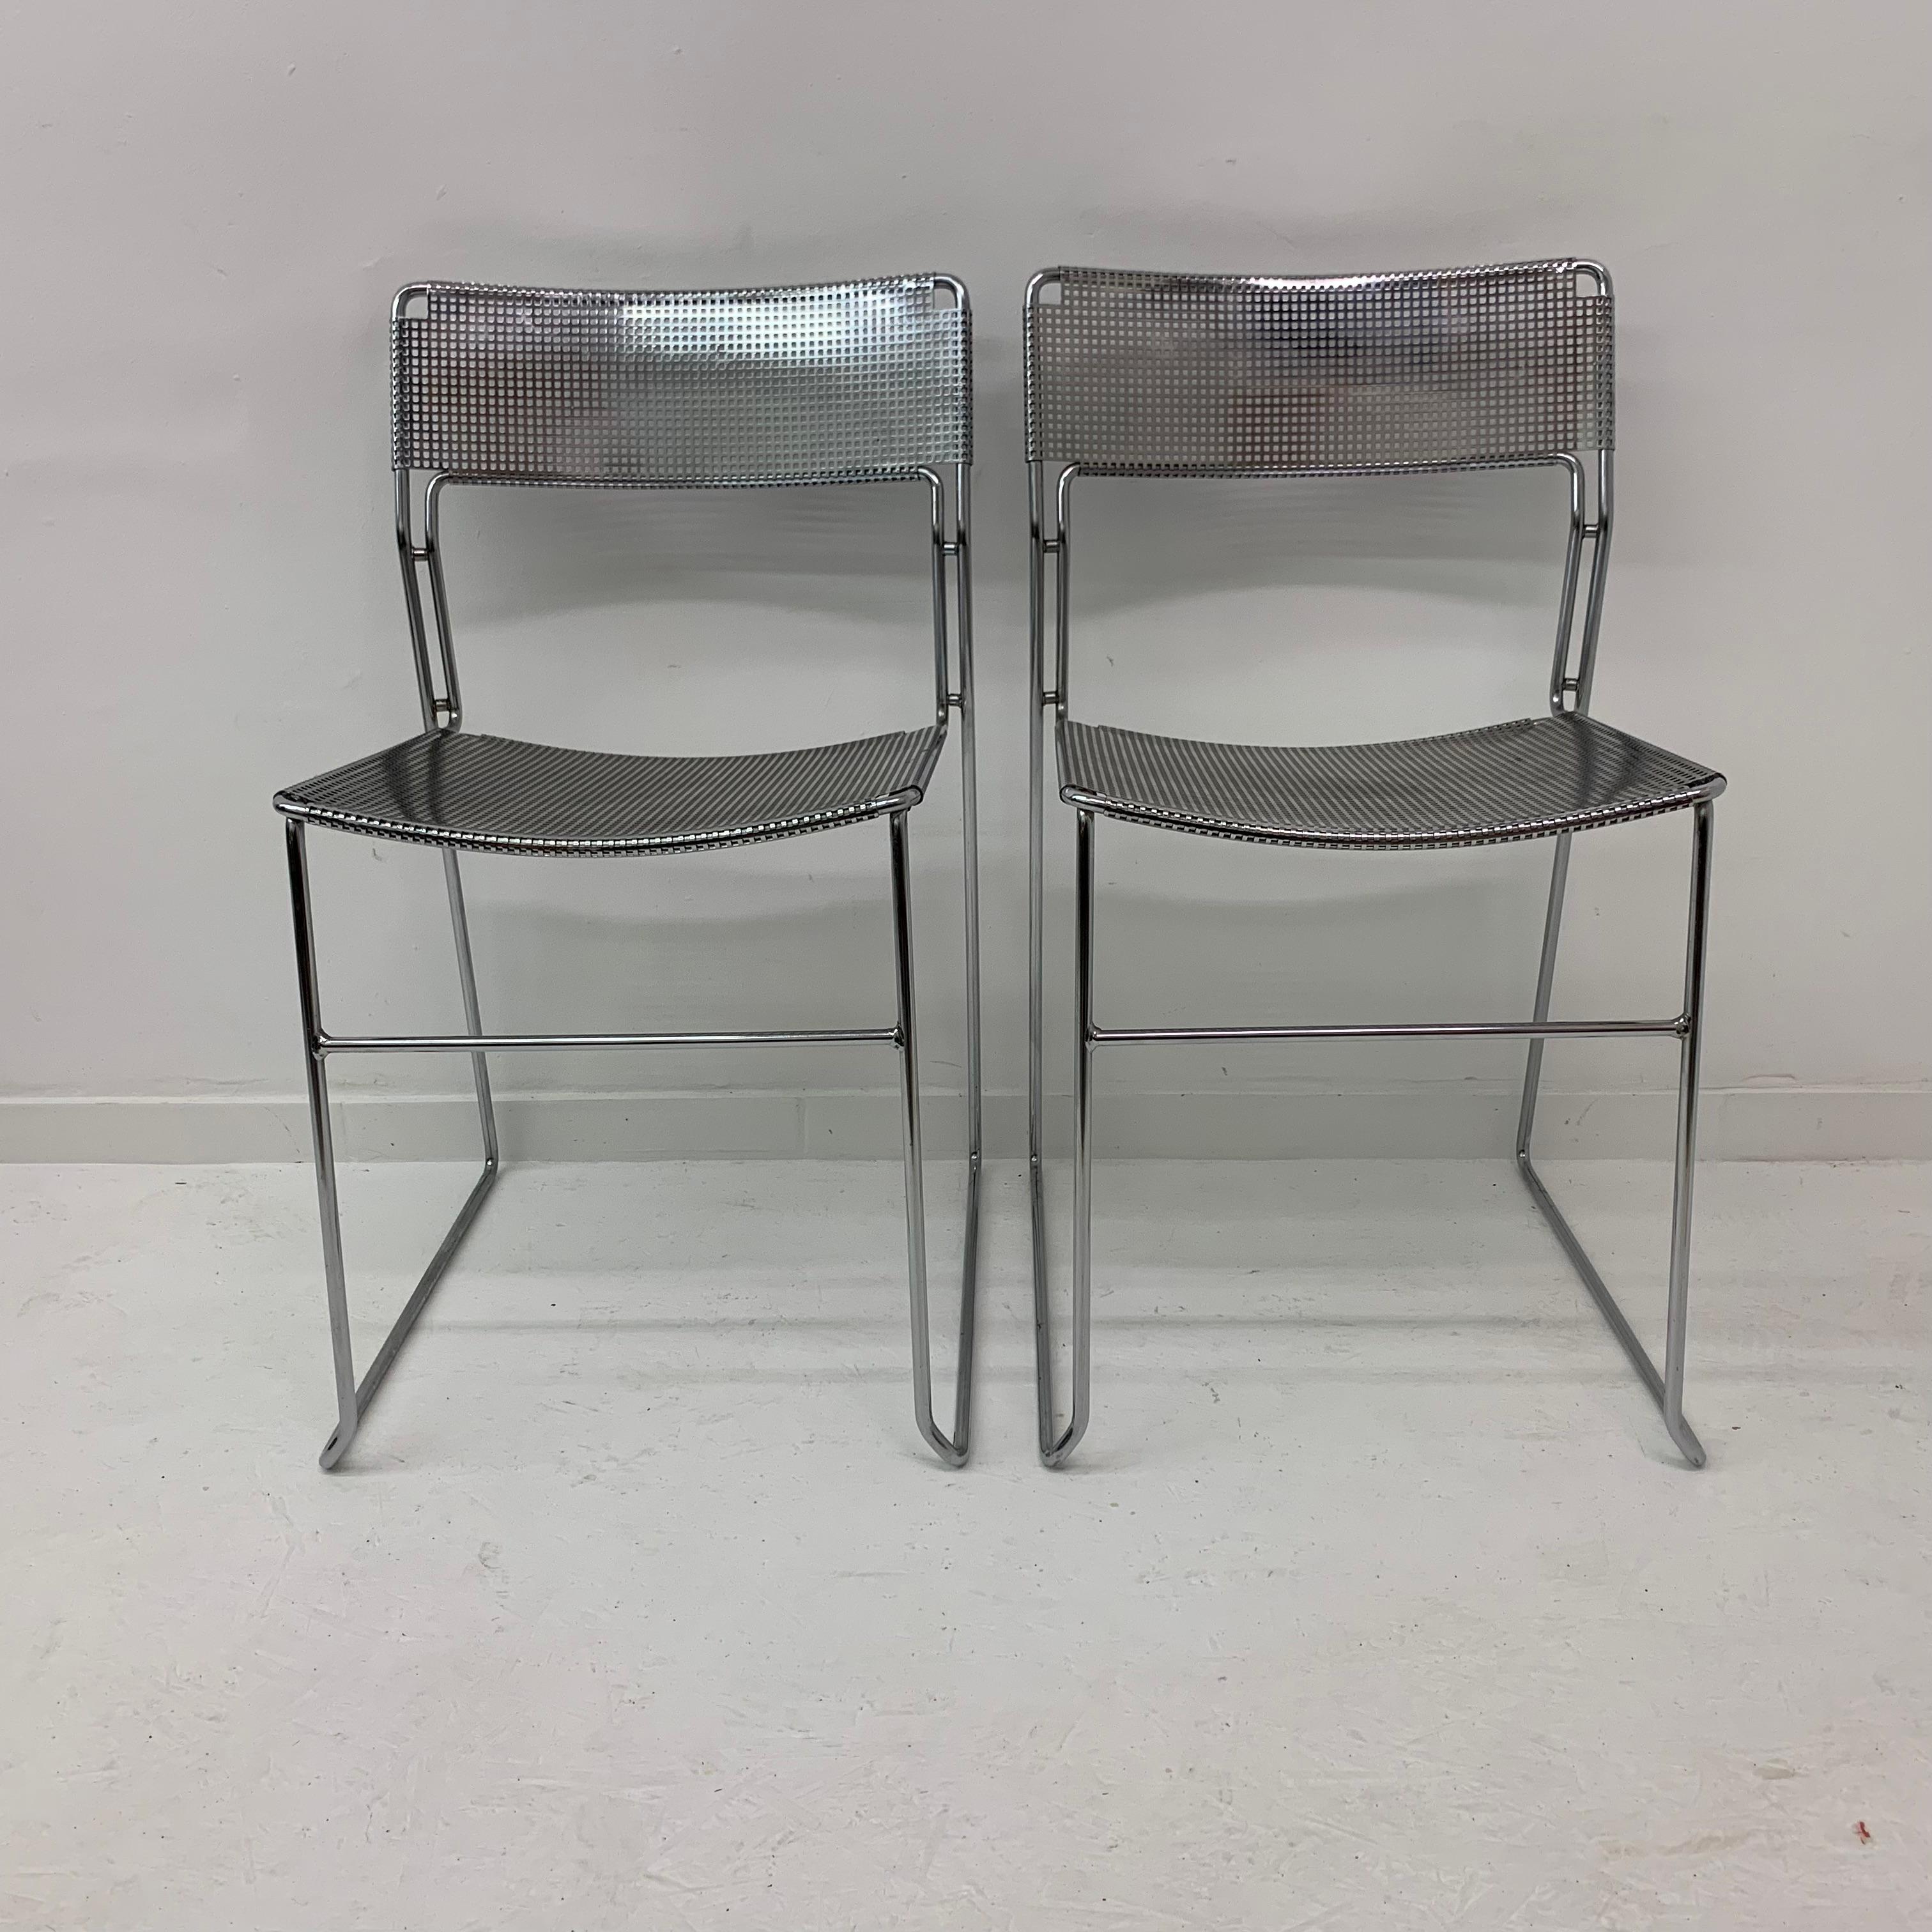 Dimensions: 44cm W, 50cm D , 75cm H , 44cm h seat
Condition: Good the metal has some corrosion.
Period: 1970’s
Material: Metal